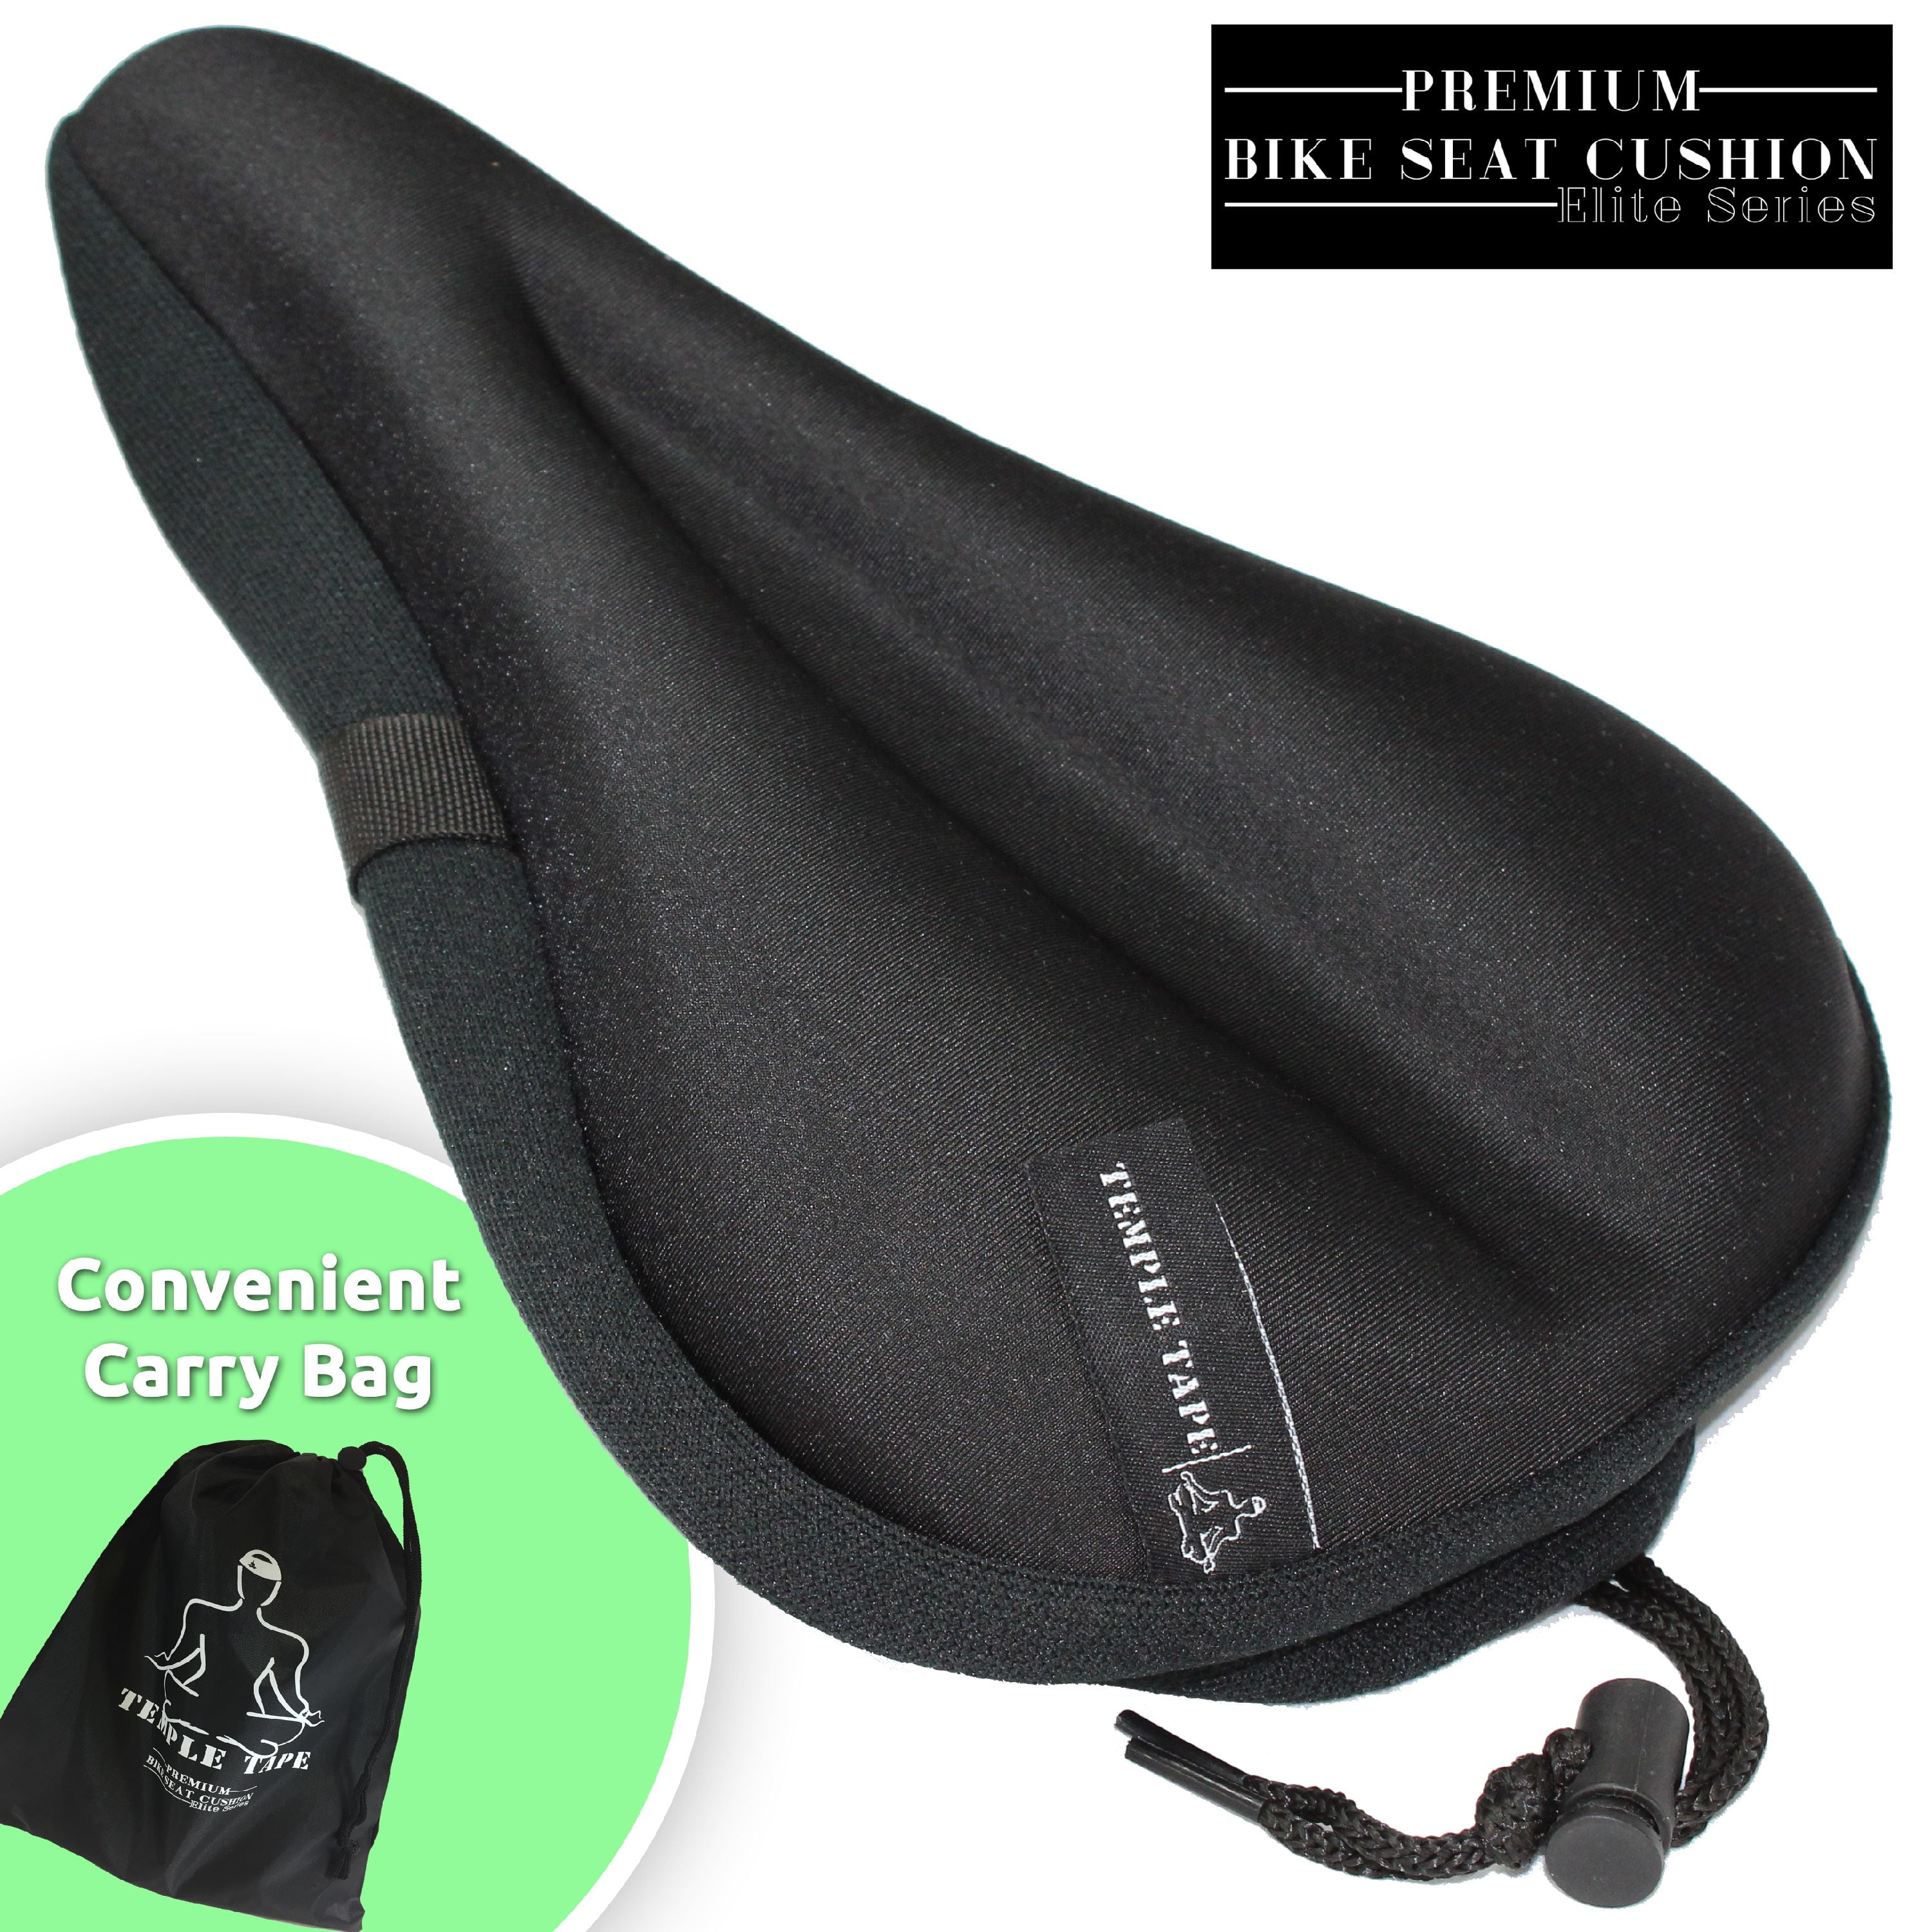 Gel Bike Saddle Cover for Wide Seat Soft Padded Bicycle Seat Cushion with Water Dust Resistant Cover for Men Women Indoor Exercise or Outdoor Cycling